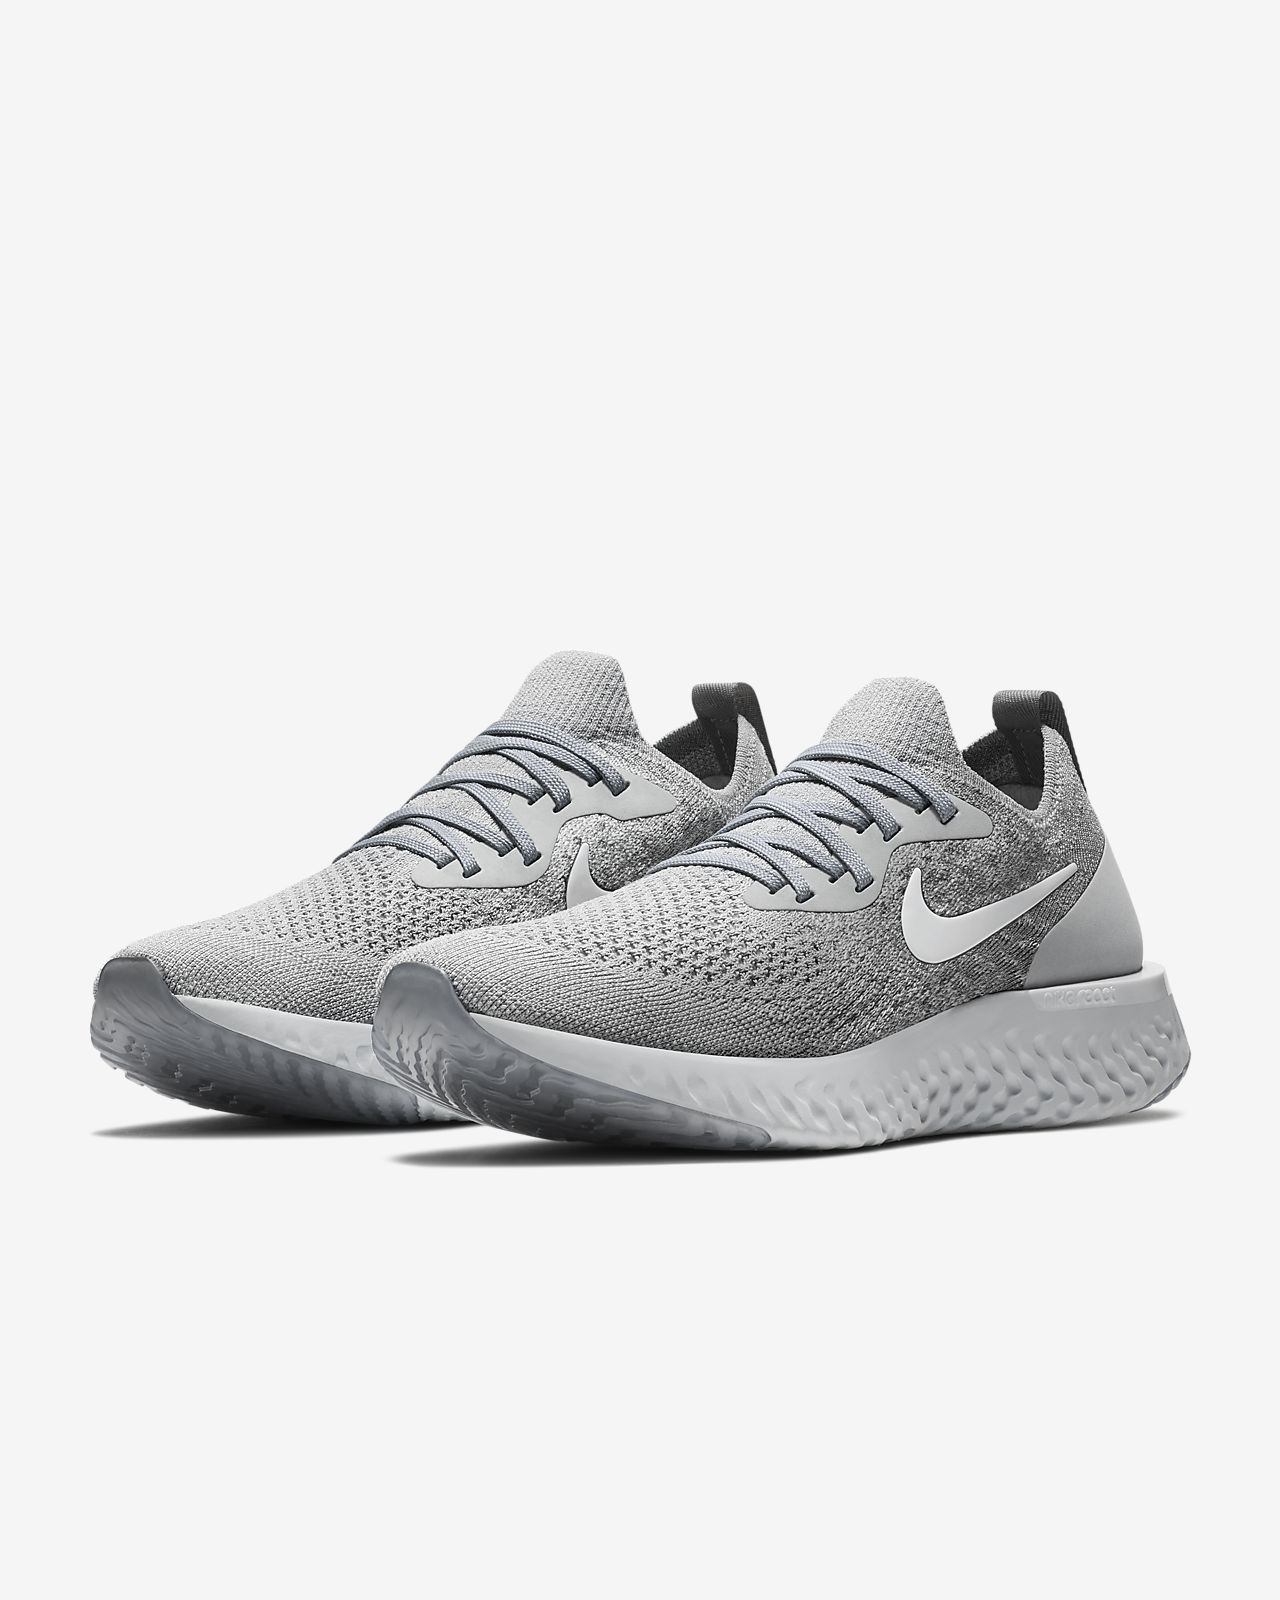 nike epic react flyknit grise wolf grey running shoes men's